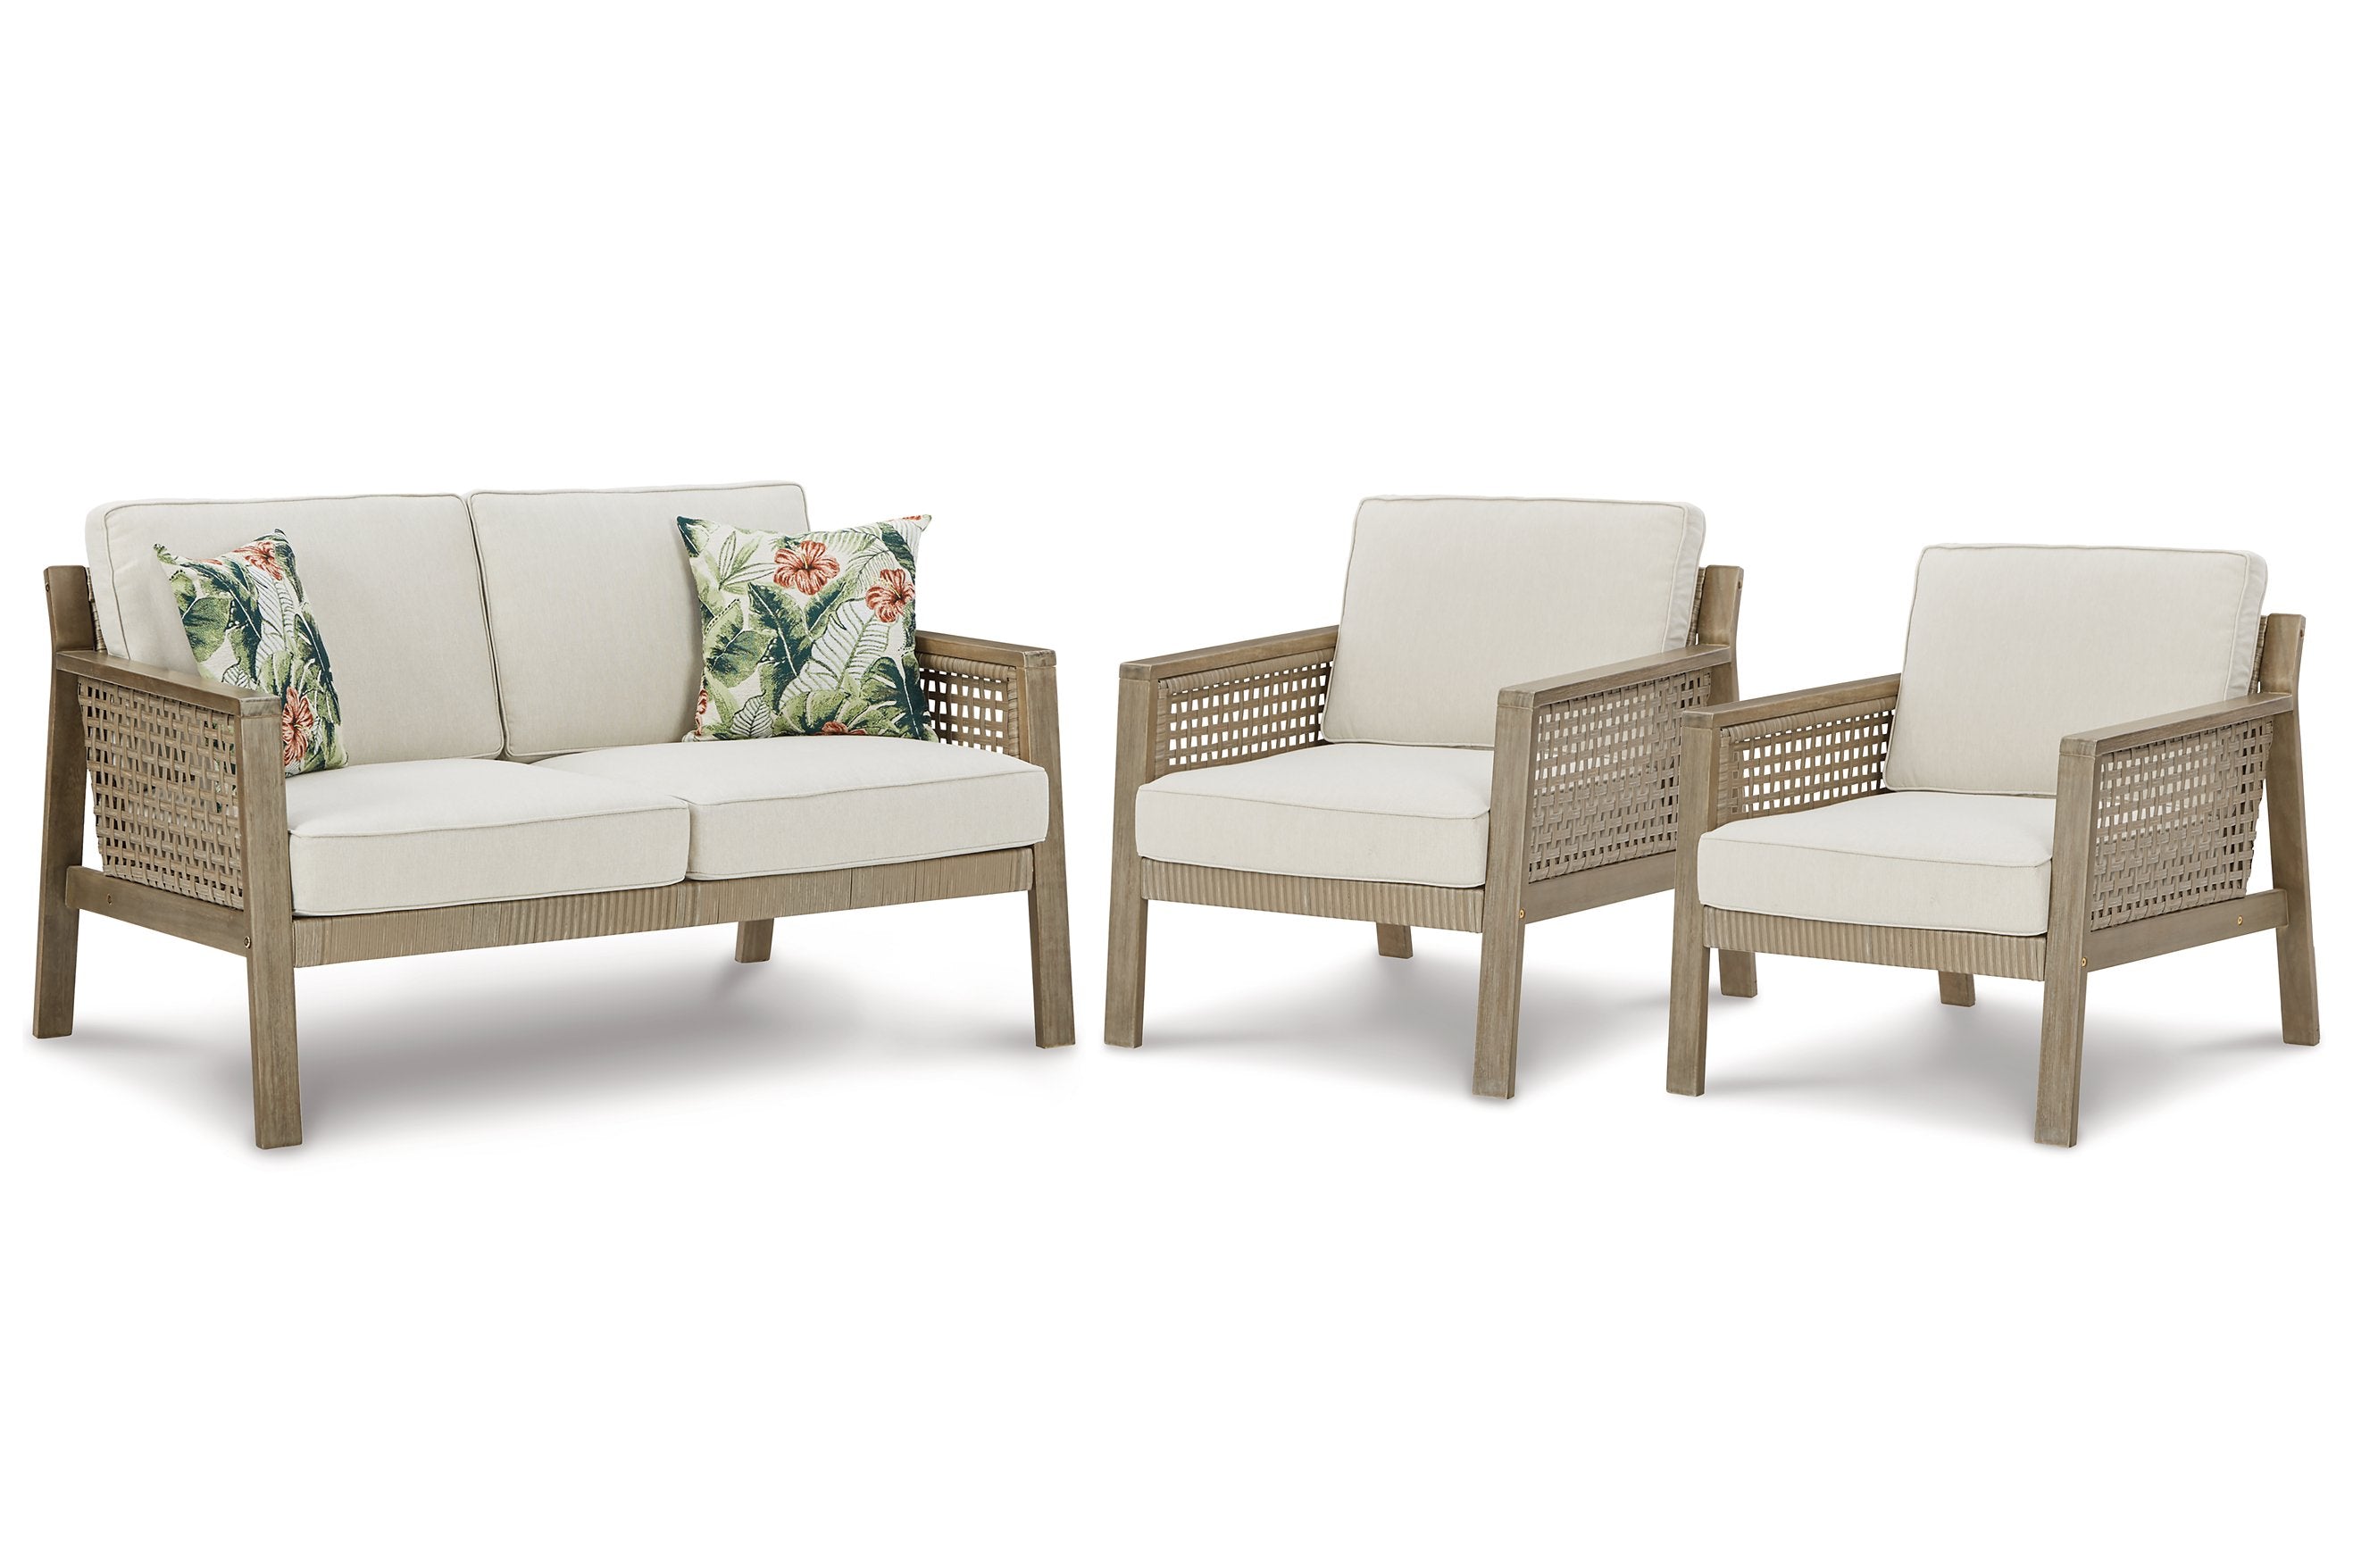 Barn Cove Outdoor Seating Set image